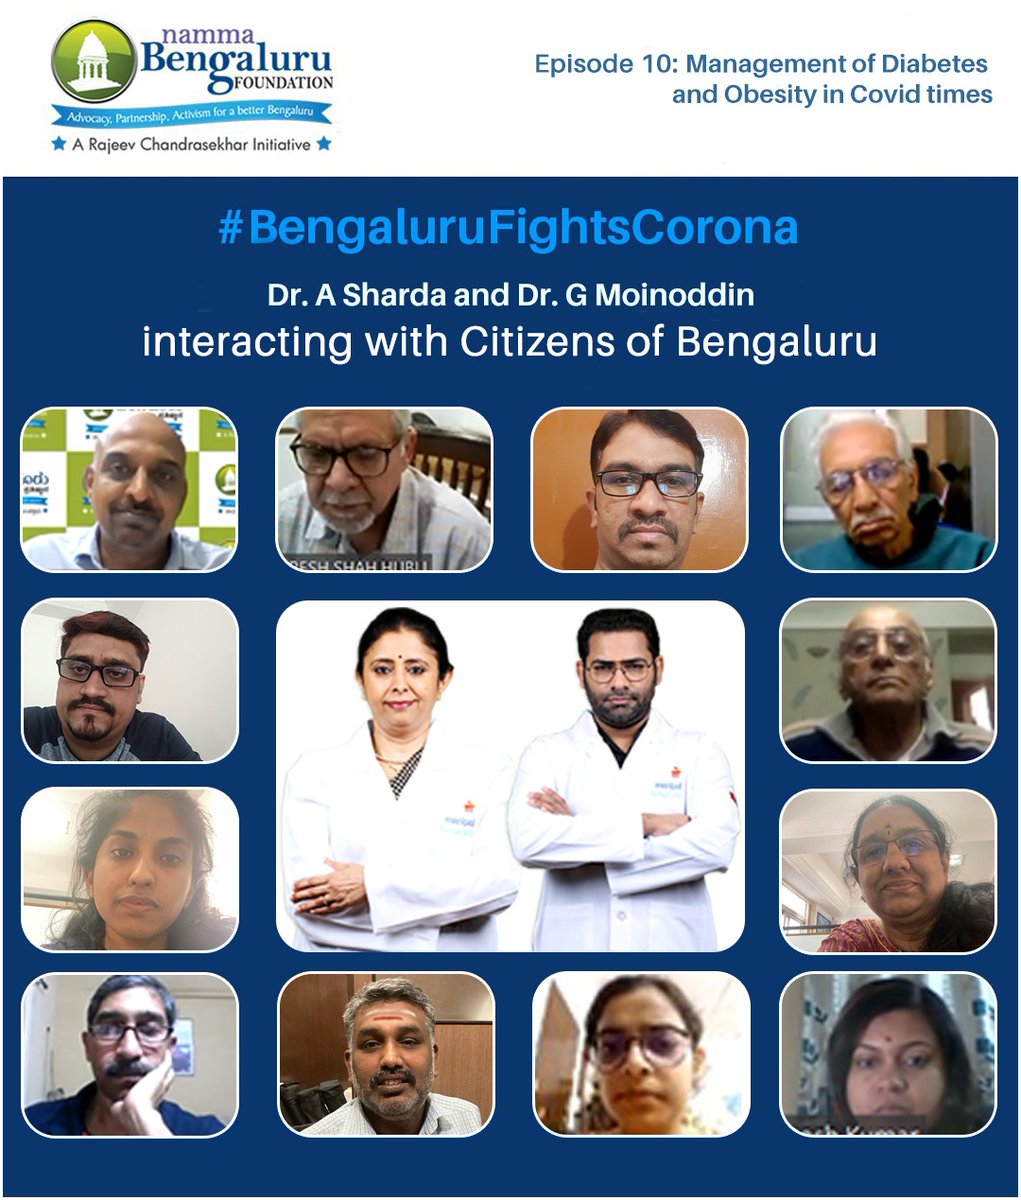 Thank You Dr. Sharda and Dr. Moinoddin for interacting with Citizens of Bengaluru in a discussion on Management of Diabetes and Obesity. 
#BengaluruFightsCorona #IndiaFightsCorona #PreventDiabetes #PreventObesity @ManipalHealth